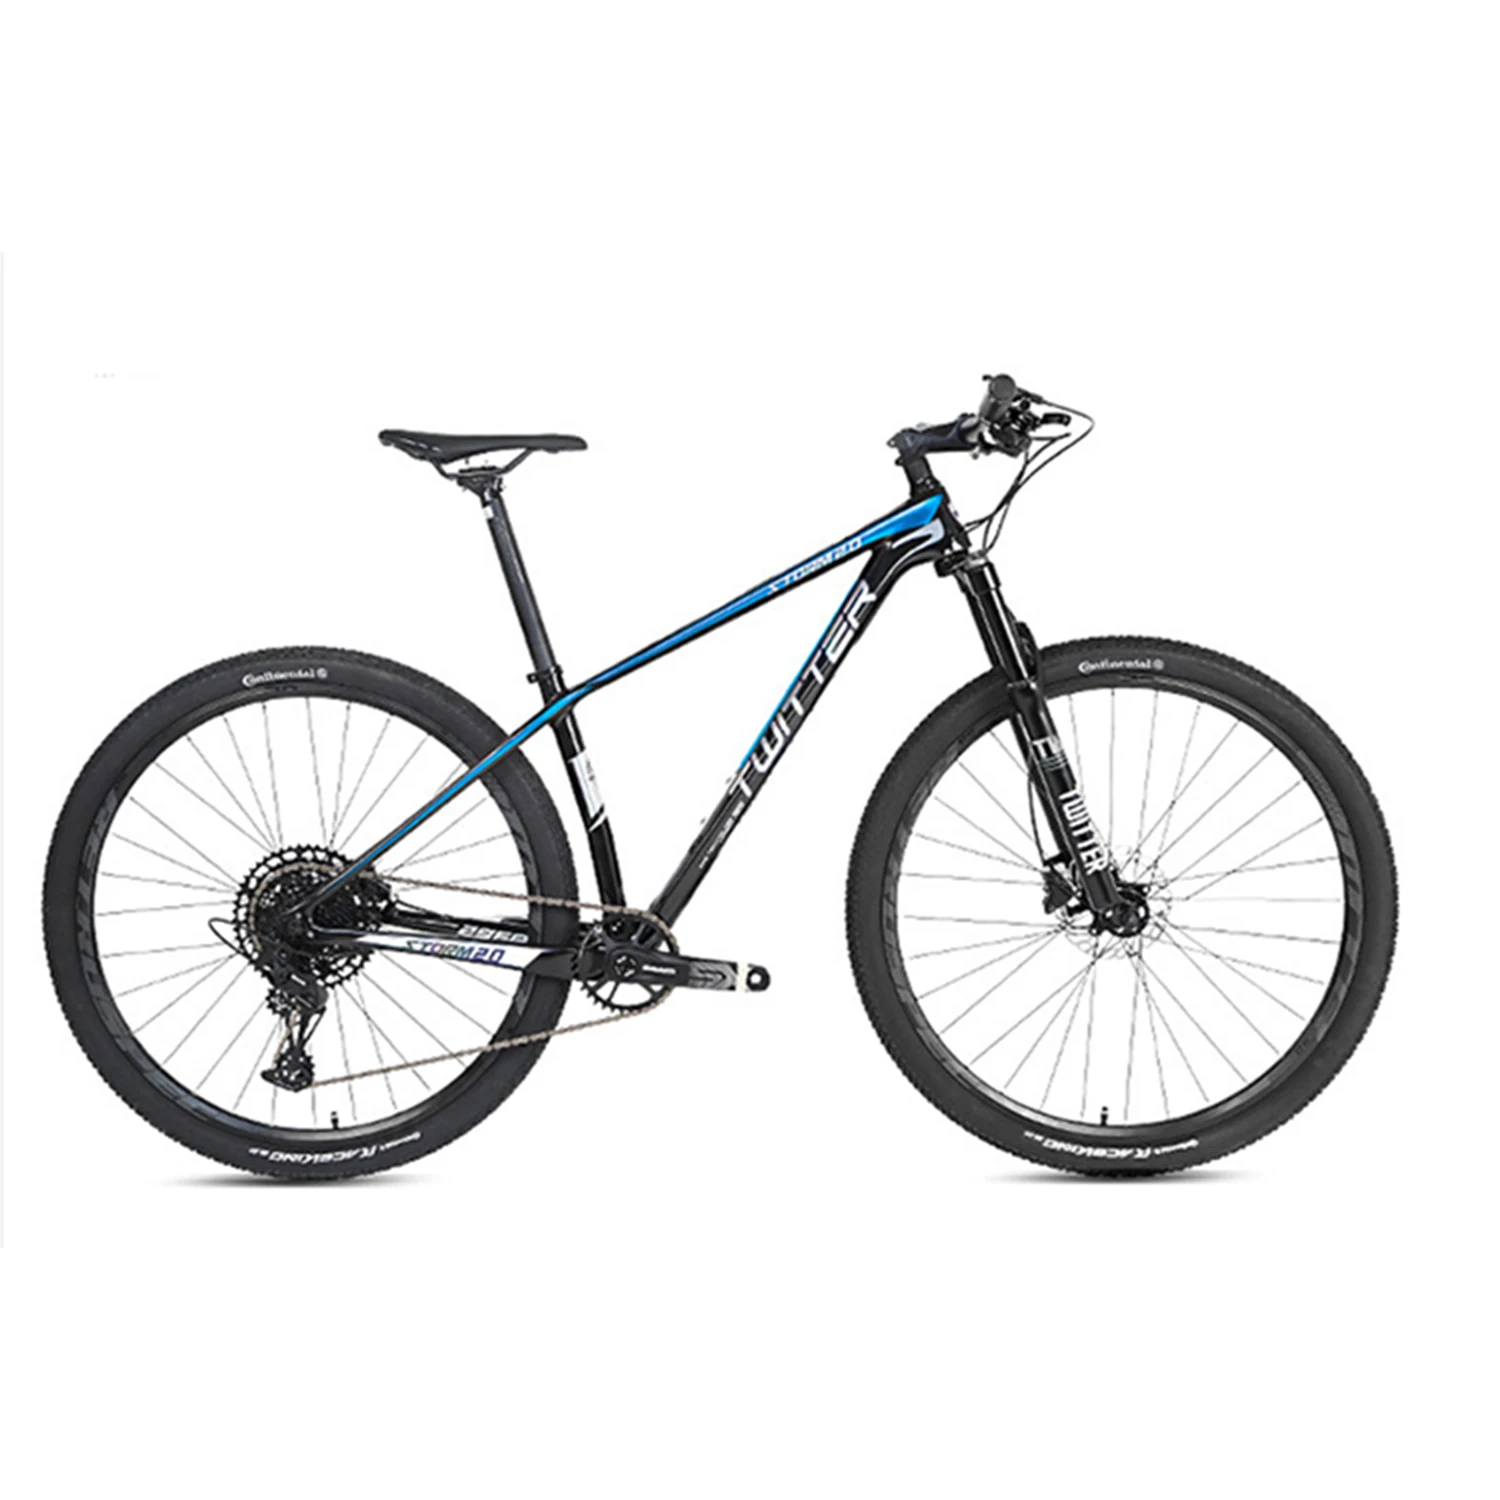 

2021 Hot Twitter STORM2.0 carbon fiber ultra light mountain bike M6100-12 speed mtb carbon bicycle 27.5 / 29 inch, Red/blue/silver/black/blackred / black silve /black blue/white red